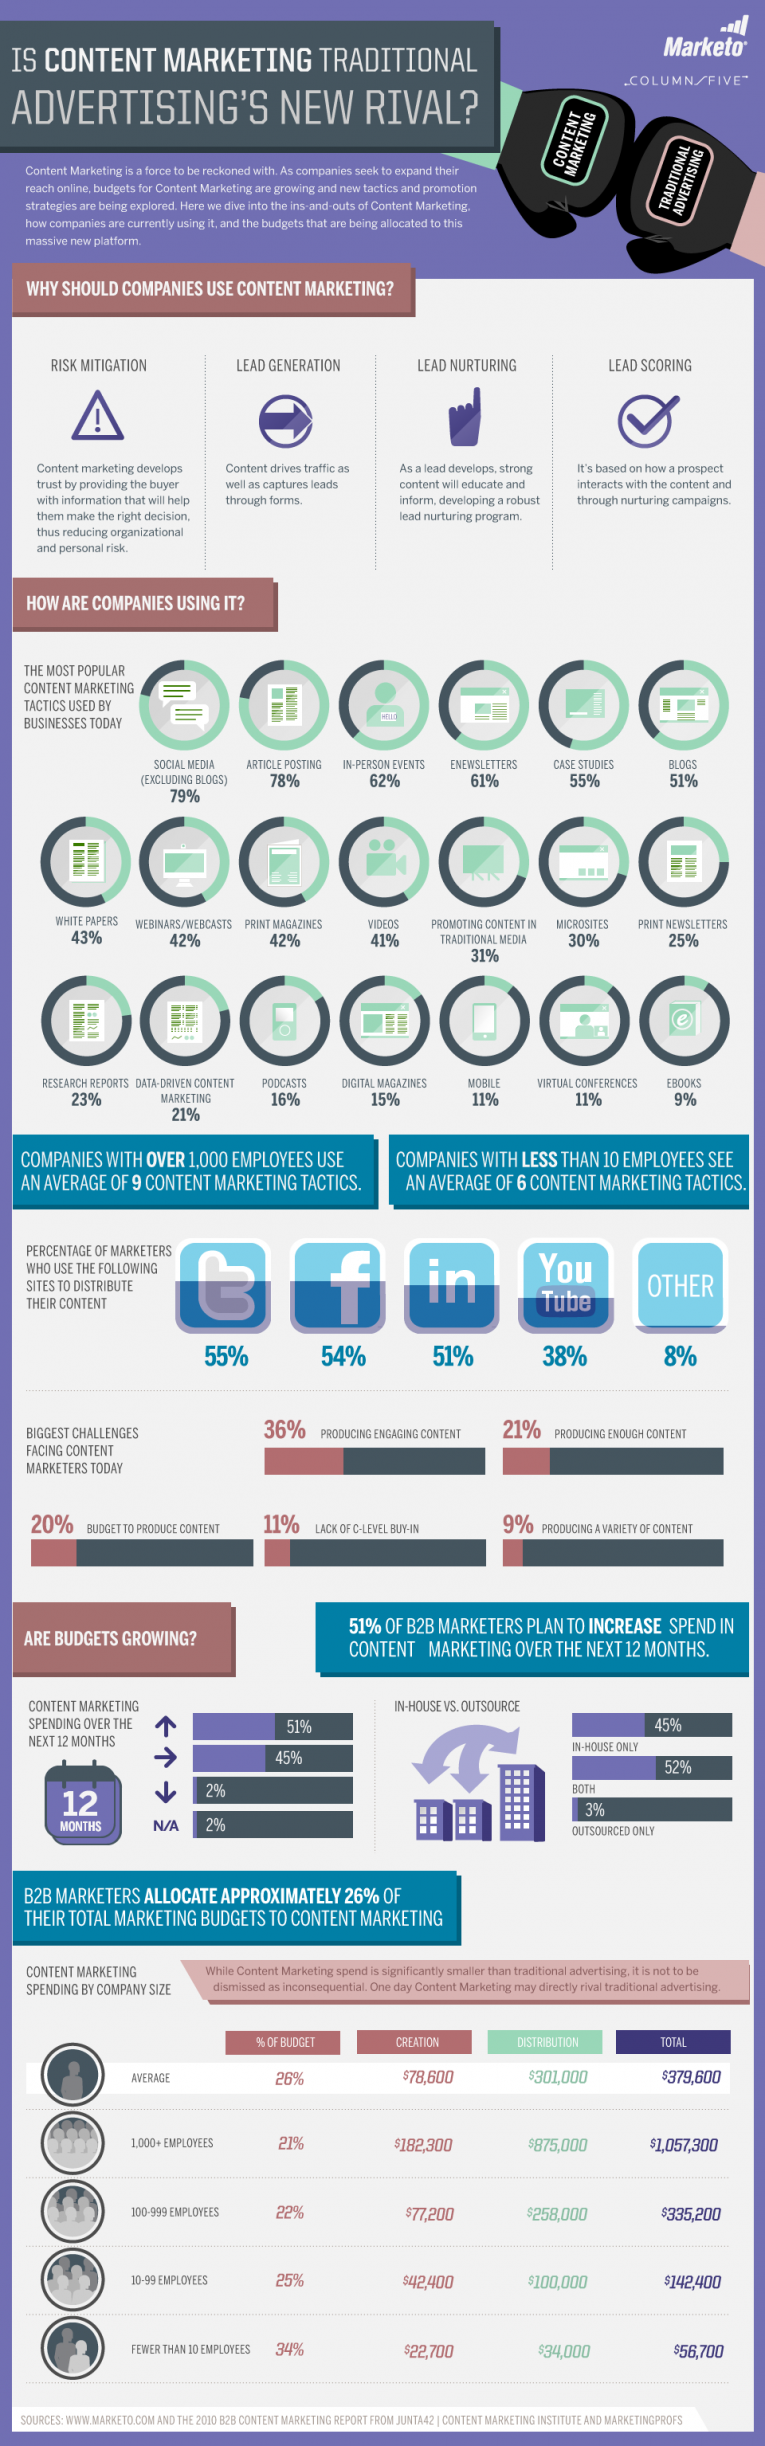 SetWidth765-Content-Marketing-Infographic-by-Marketo